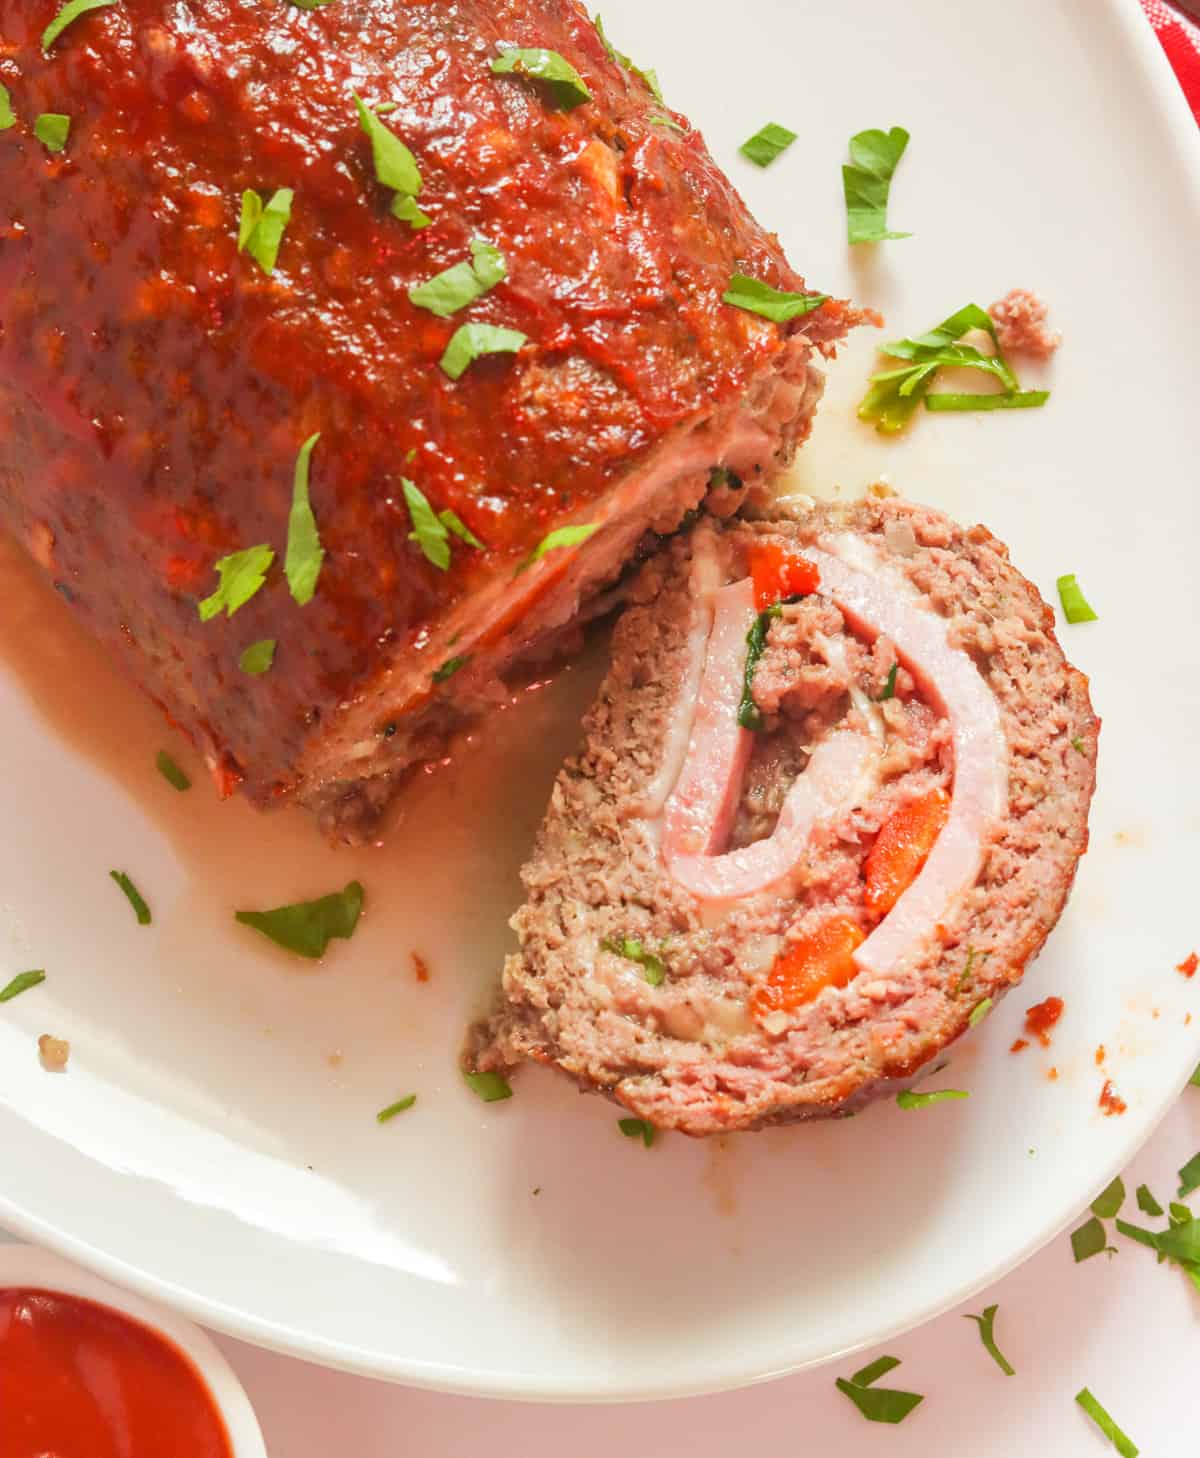 Delicious stuffed meatloaf for the ultimate comfort food